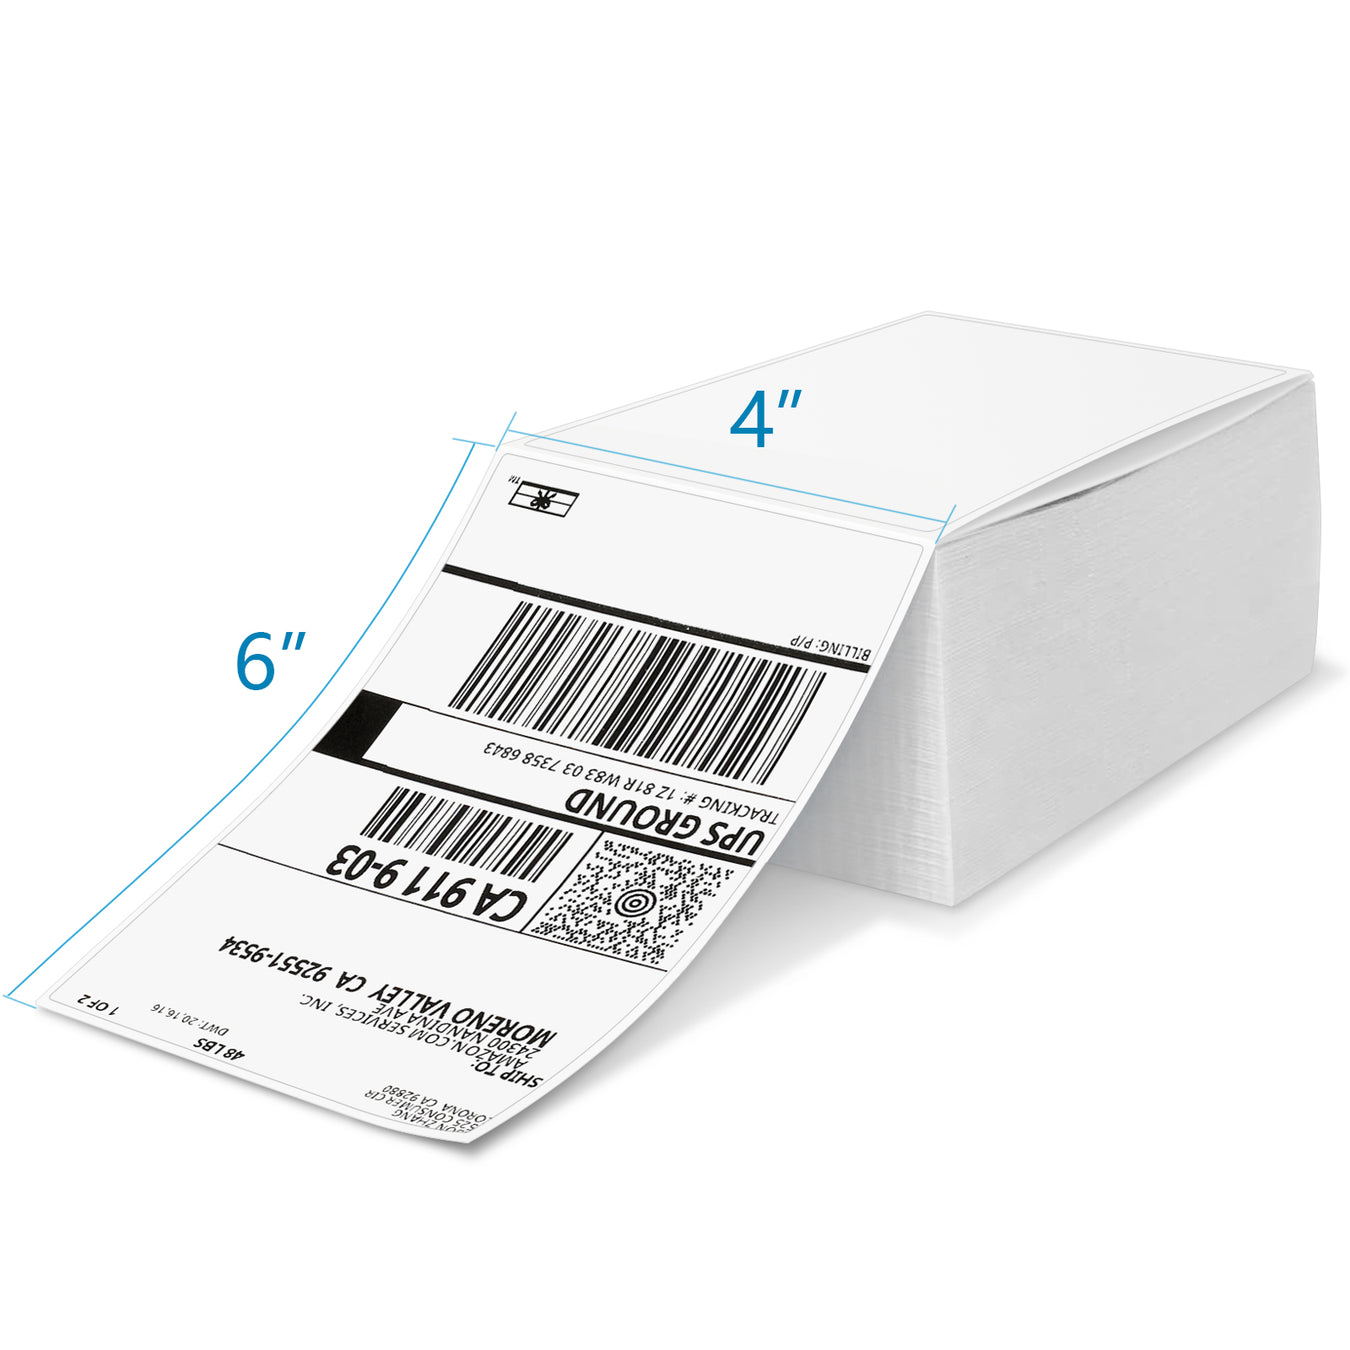 Shipping Label 4x6 inch for Bluetooth shipping label